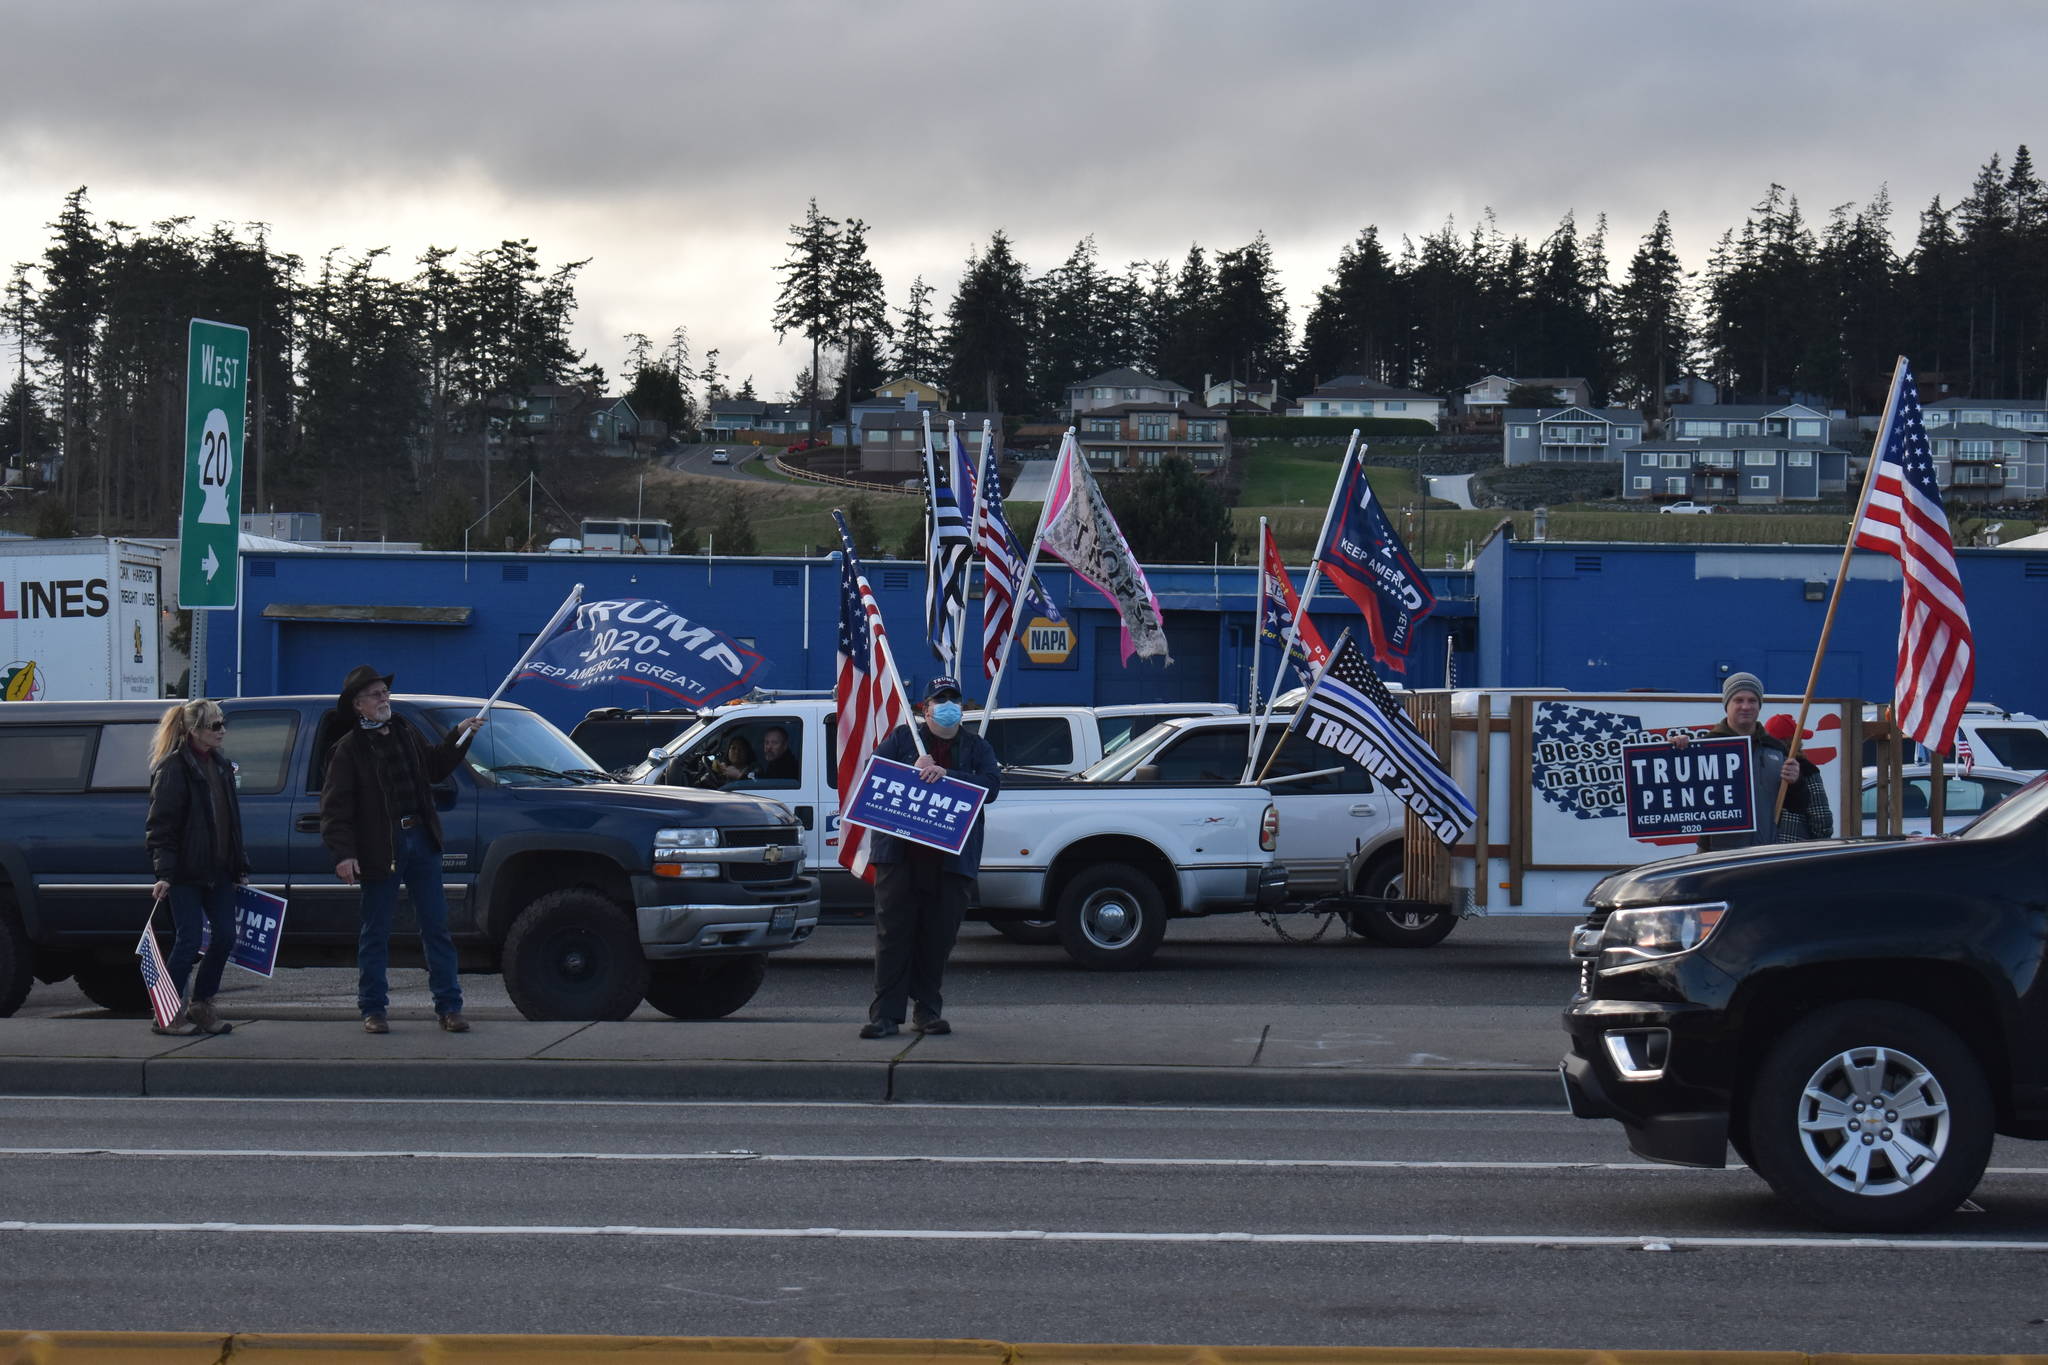 On Wednesday, Trump supporters gather at the intersection of Highway 20 and Southeast Pioneer Way in Oak Harbor to show their support for the outgoing president, and to protest the election of Joe Biden The event coincided with the storming of the U.S. Capitol by other President Donald Trump supporters. Photo by Emily Gilbert/Whidbey News-Times